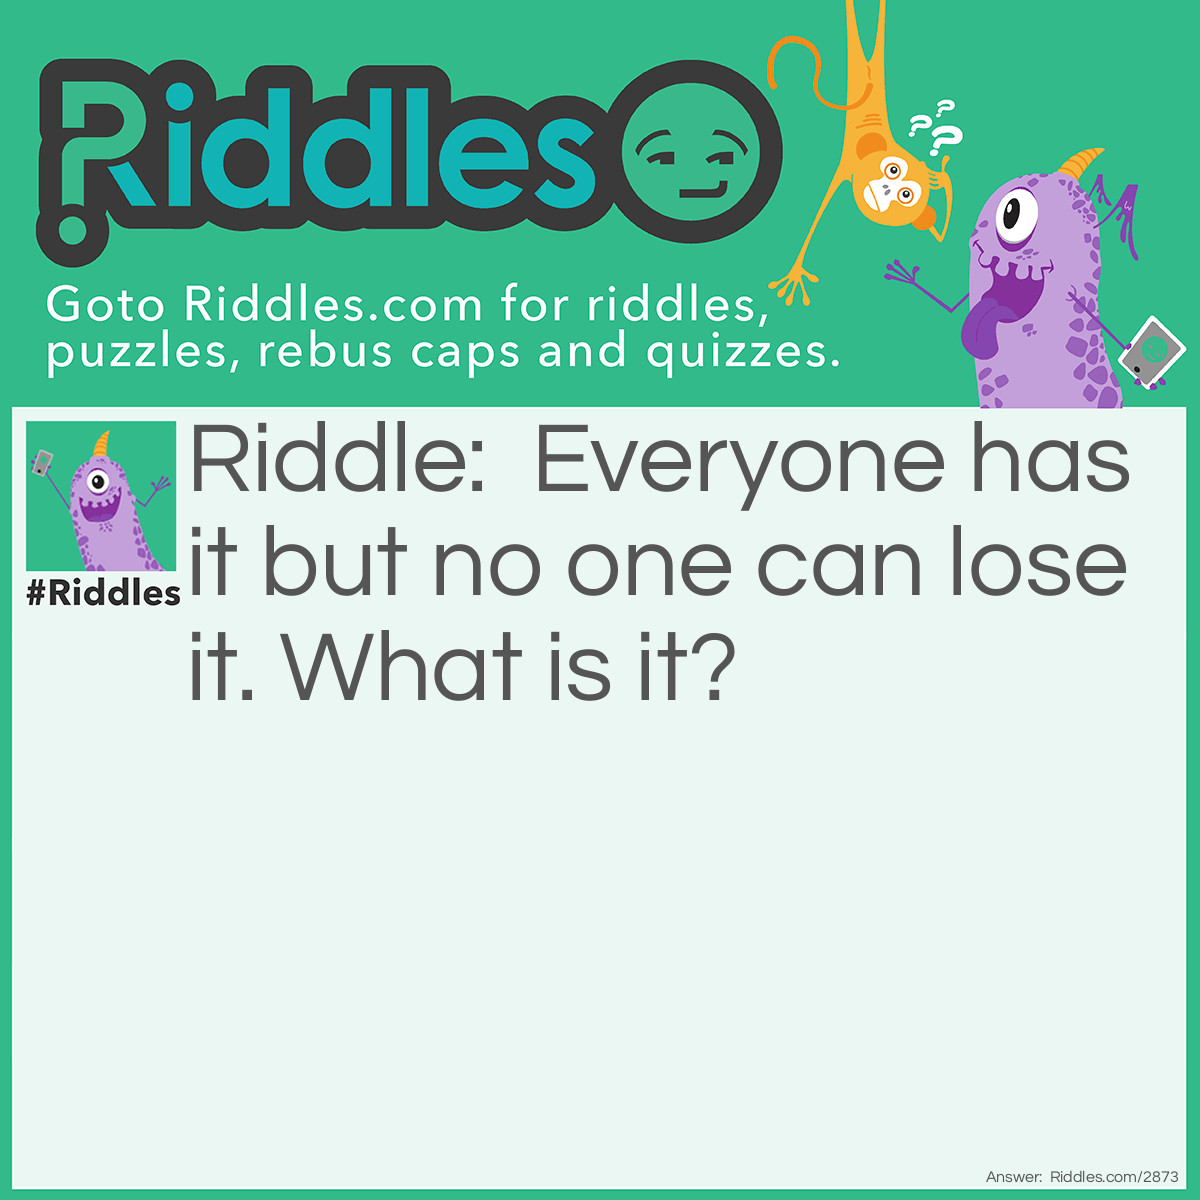 Riddle: Everyone has it but no one can lose it. What is it? Answer: A shadow.